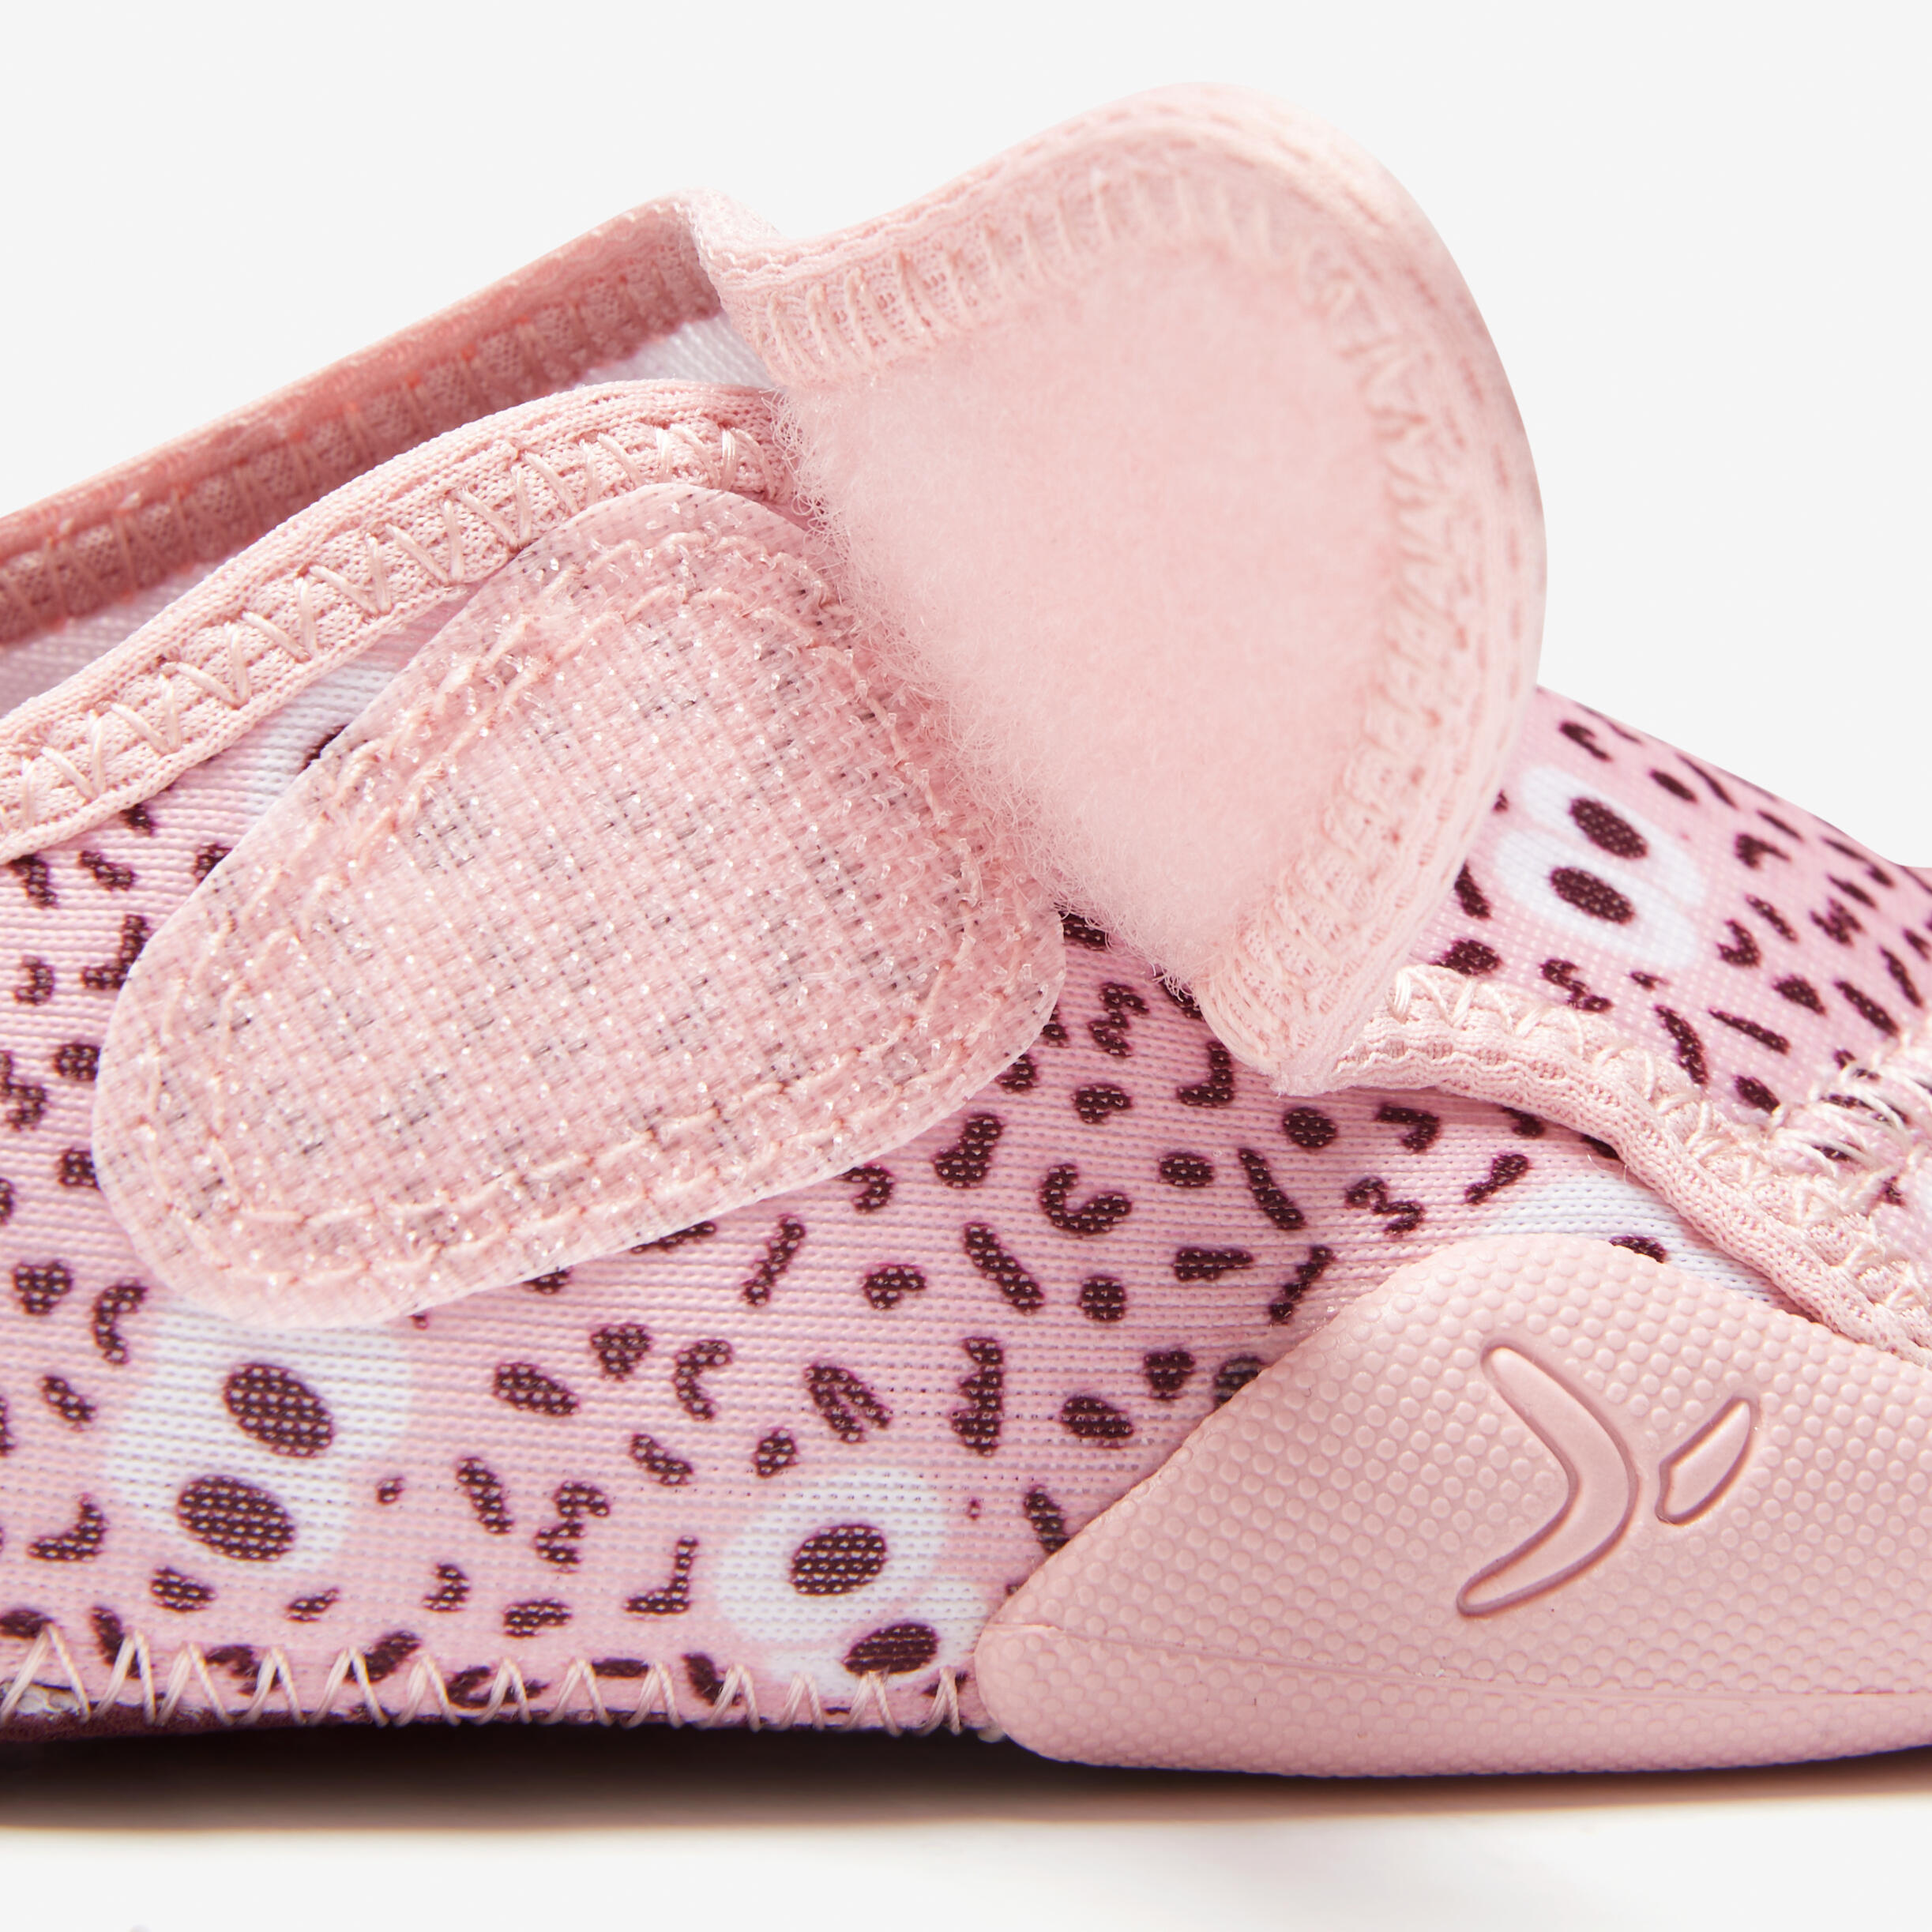 Kids' Non-Slip and Breathable Bootee - Patterns 3/8